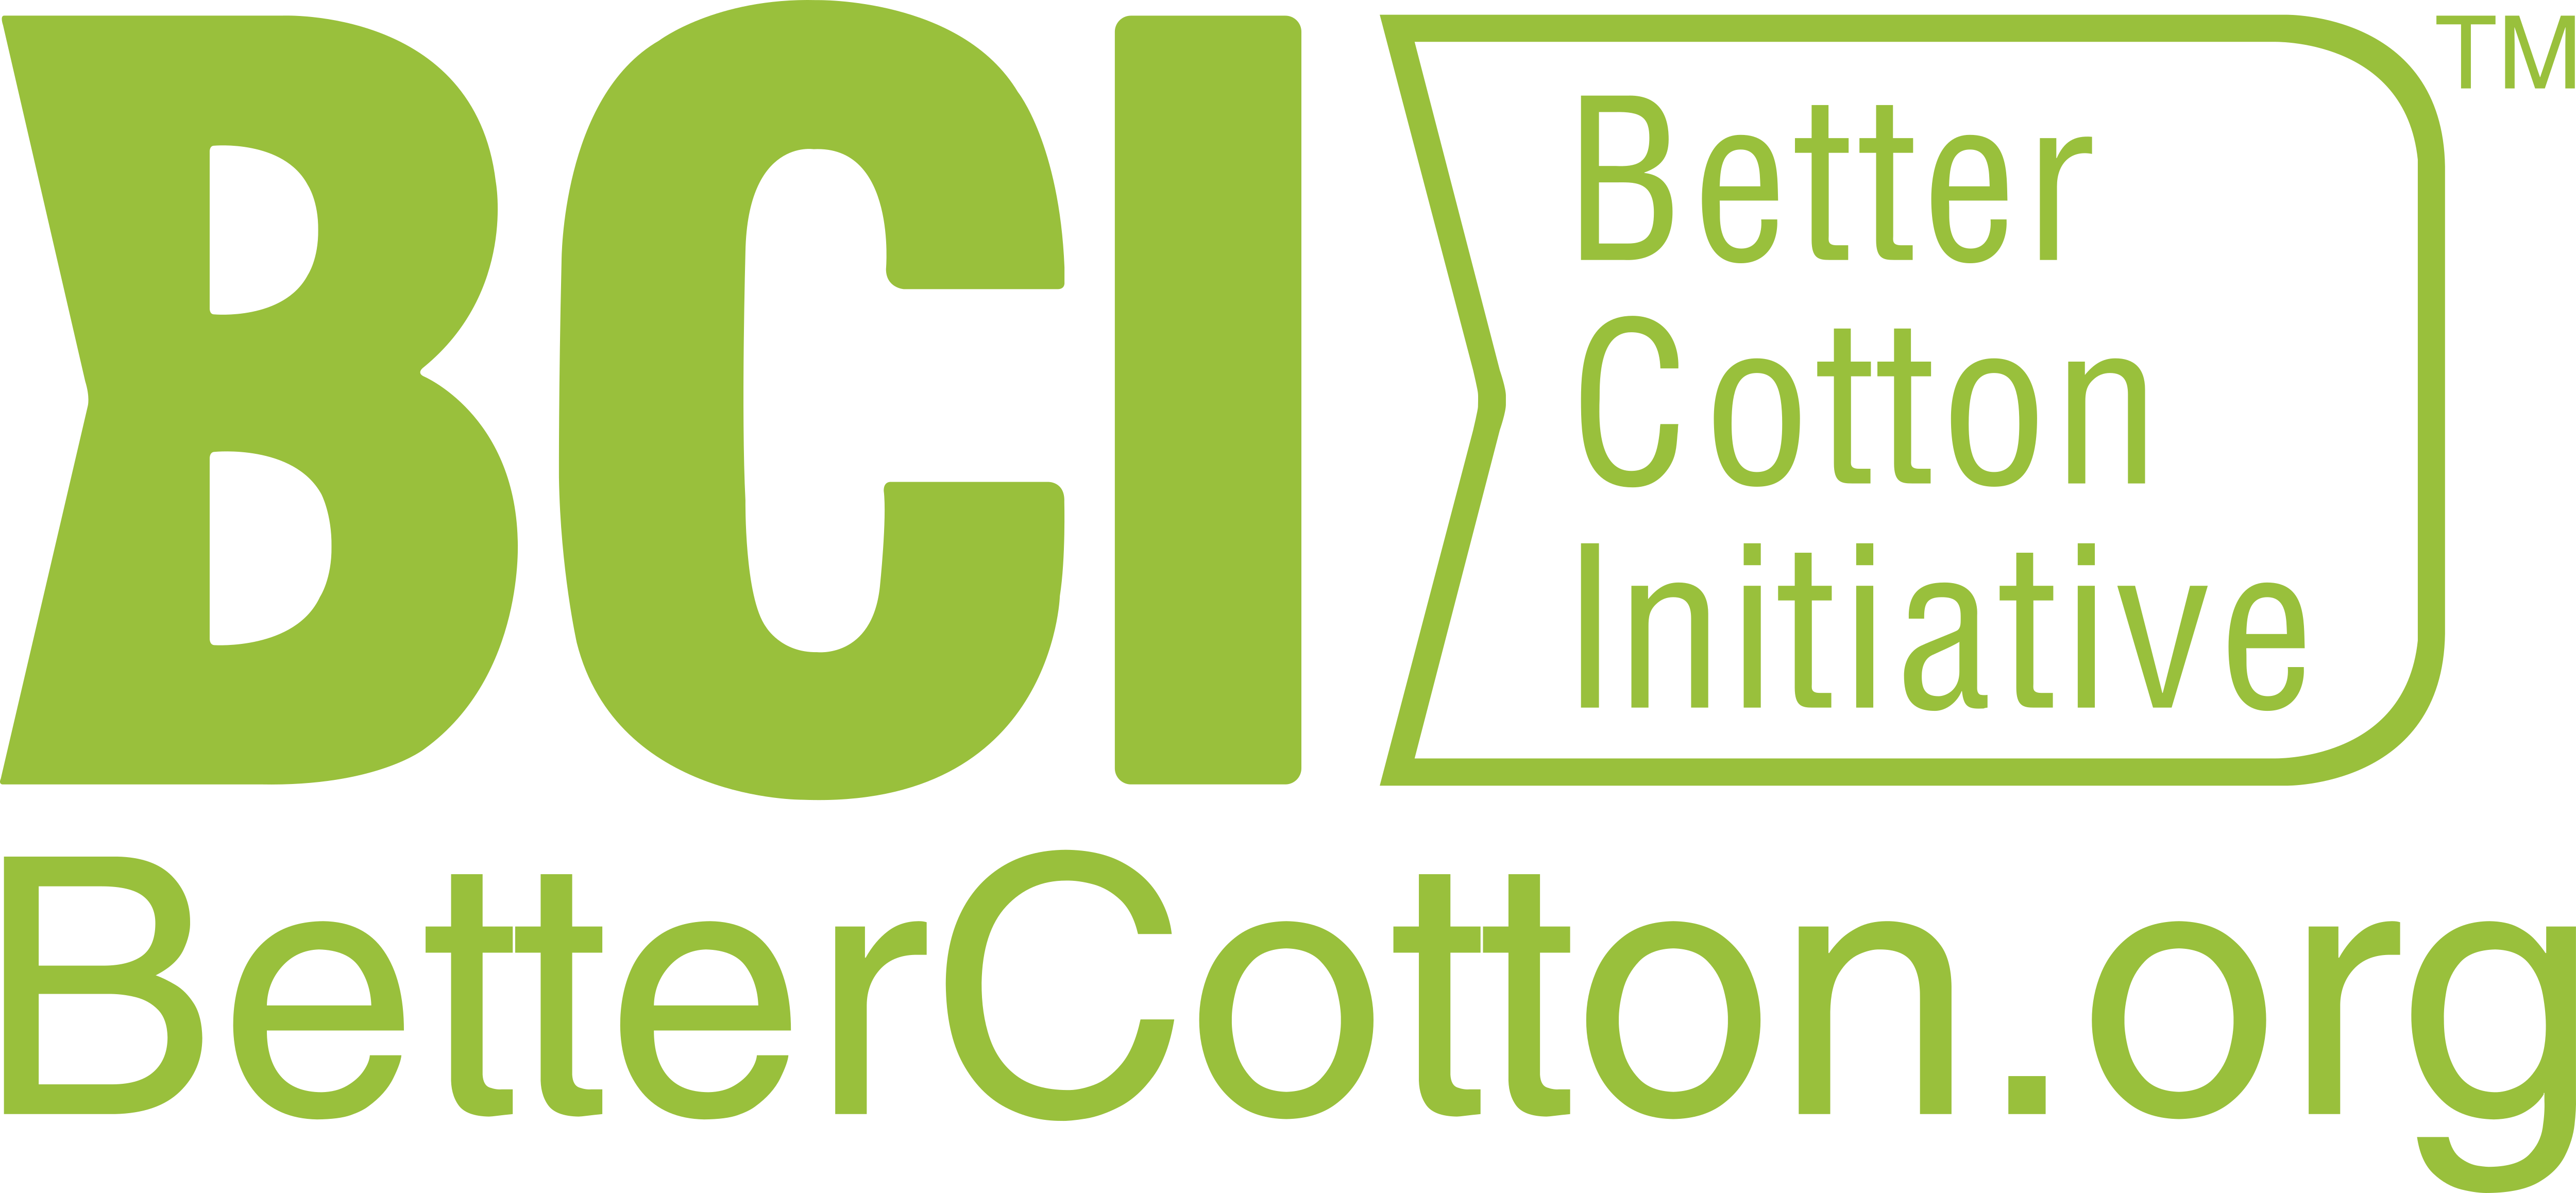 Better Cotton Iniciative – Logos Download